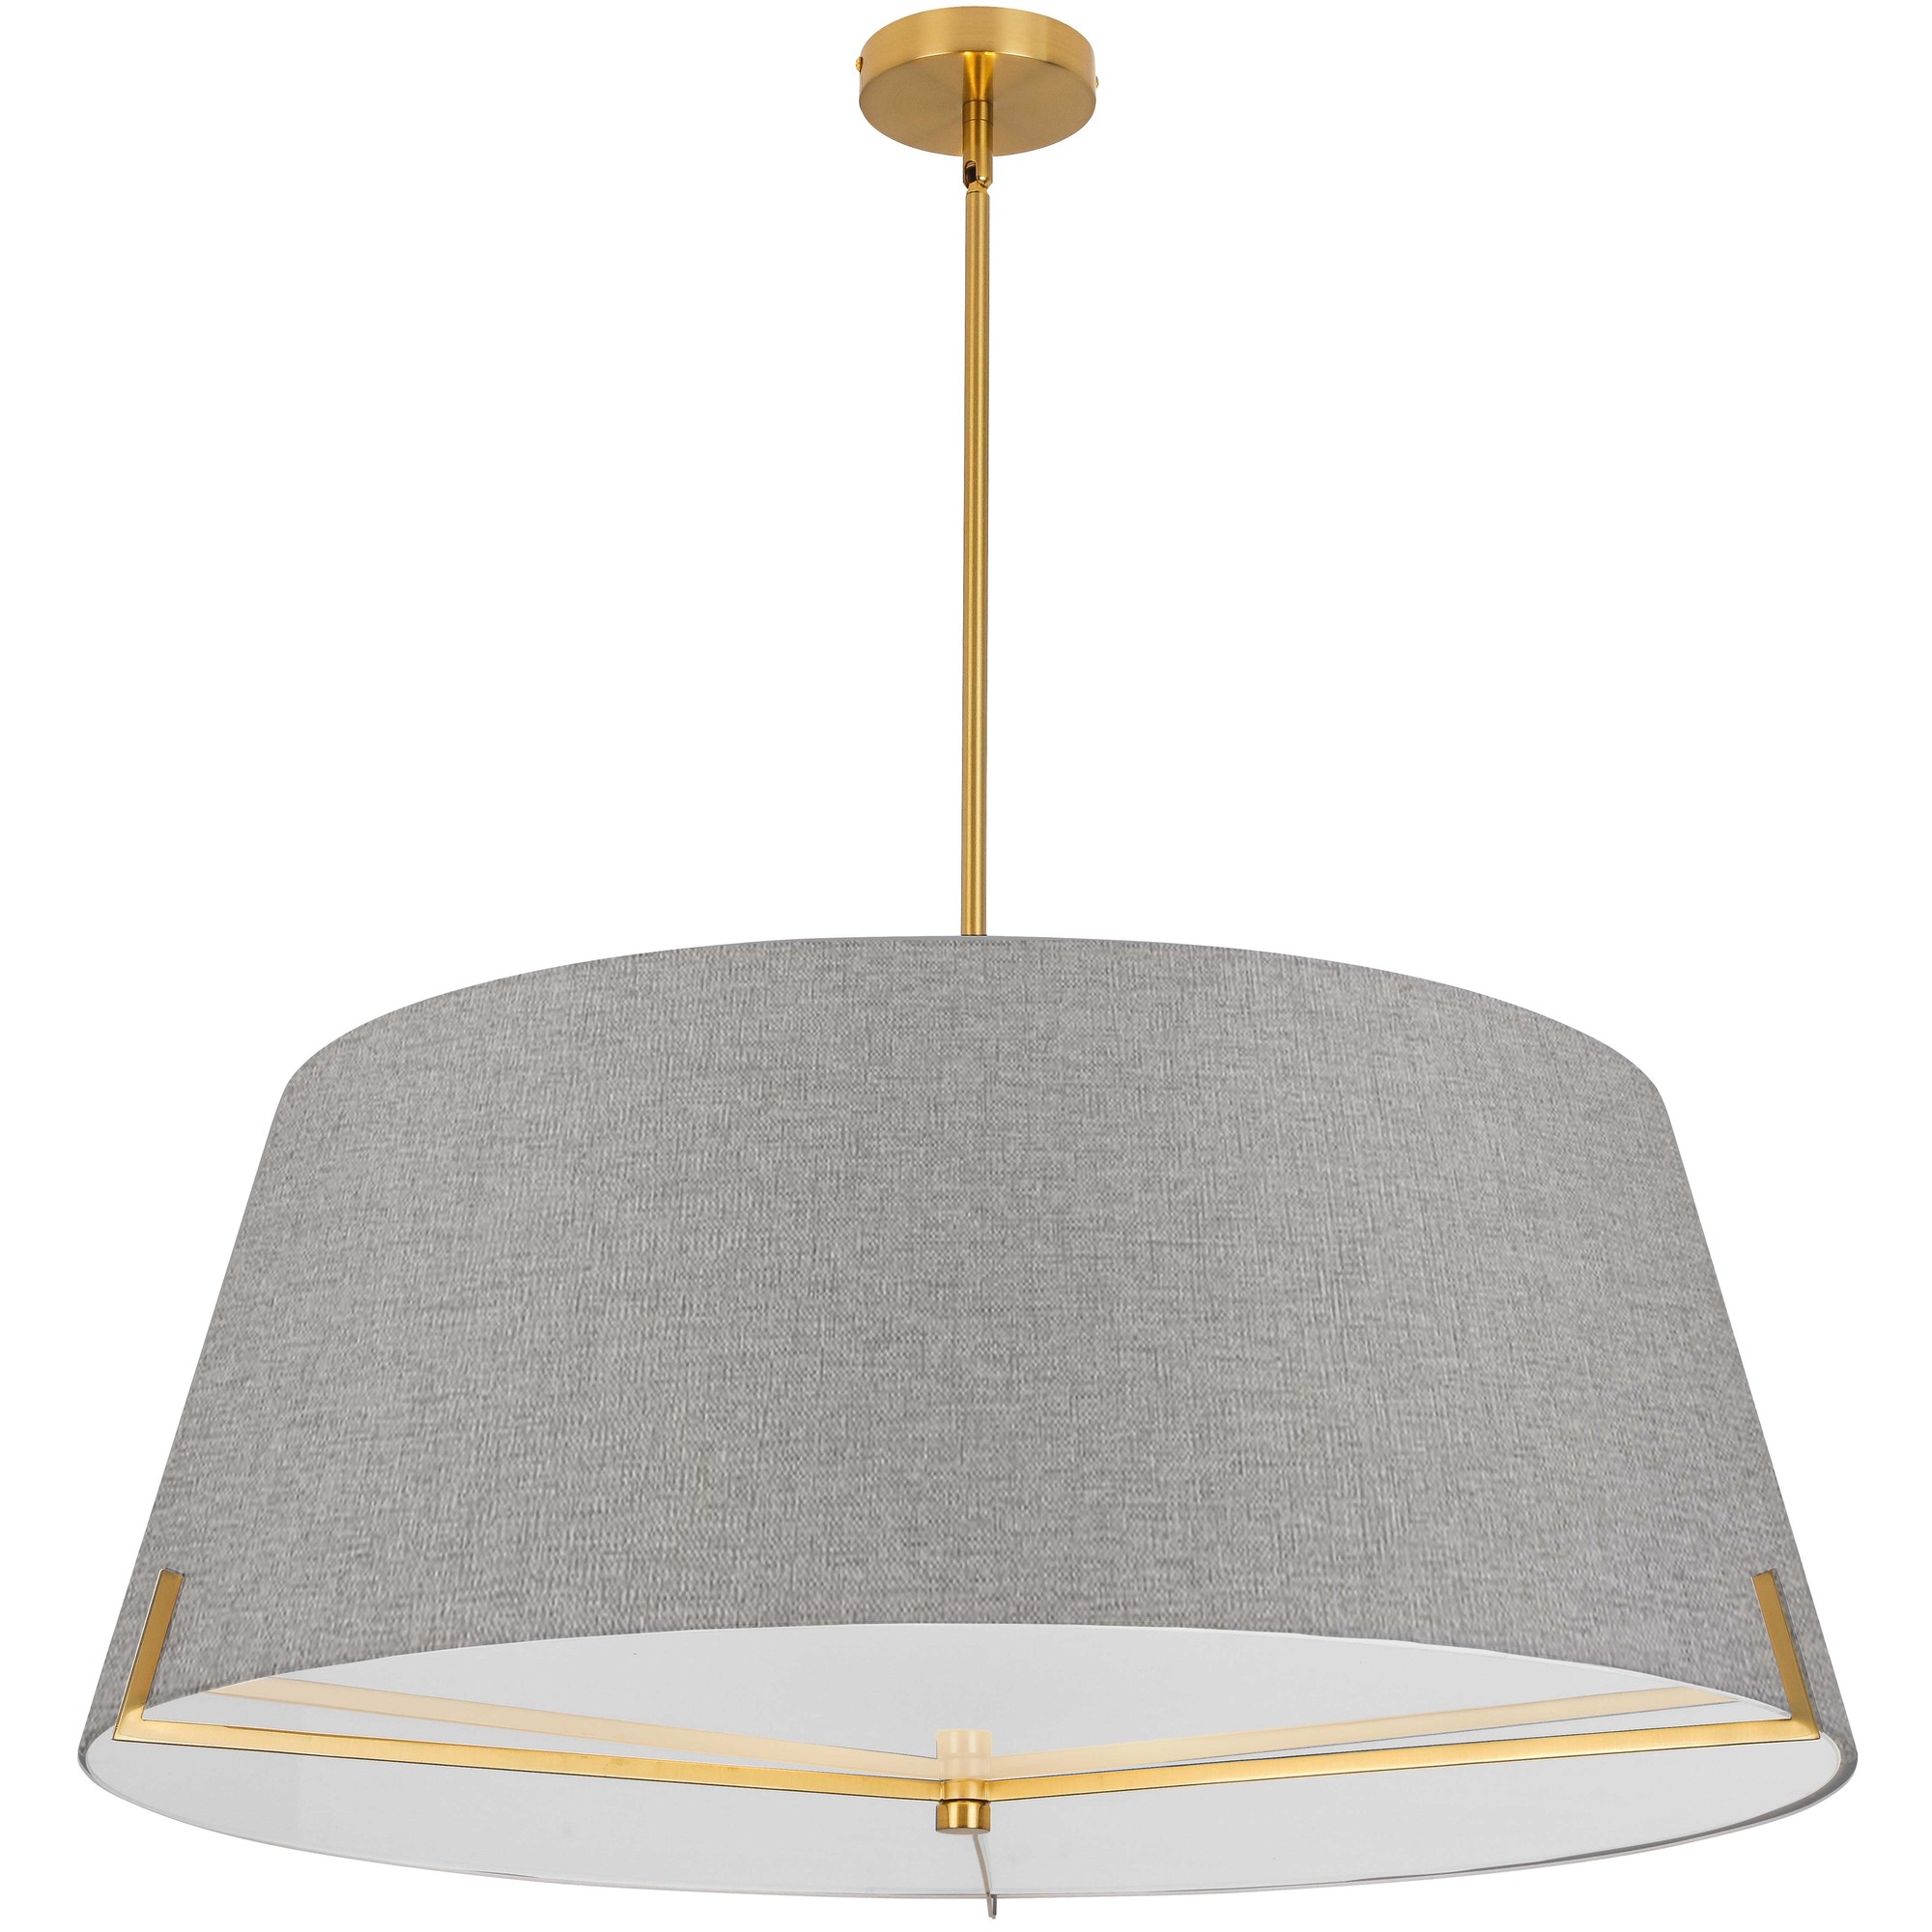 4 Light Incandescent Pendant Aged Brass with Grey Fabric shade